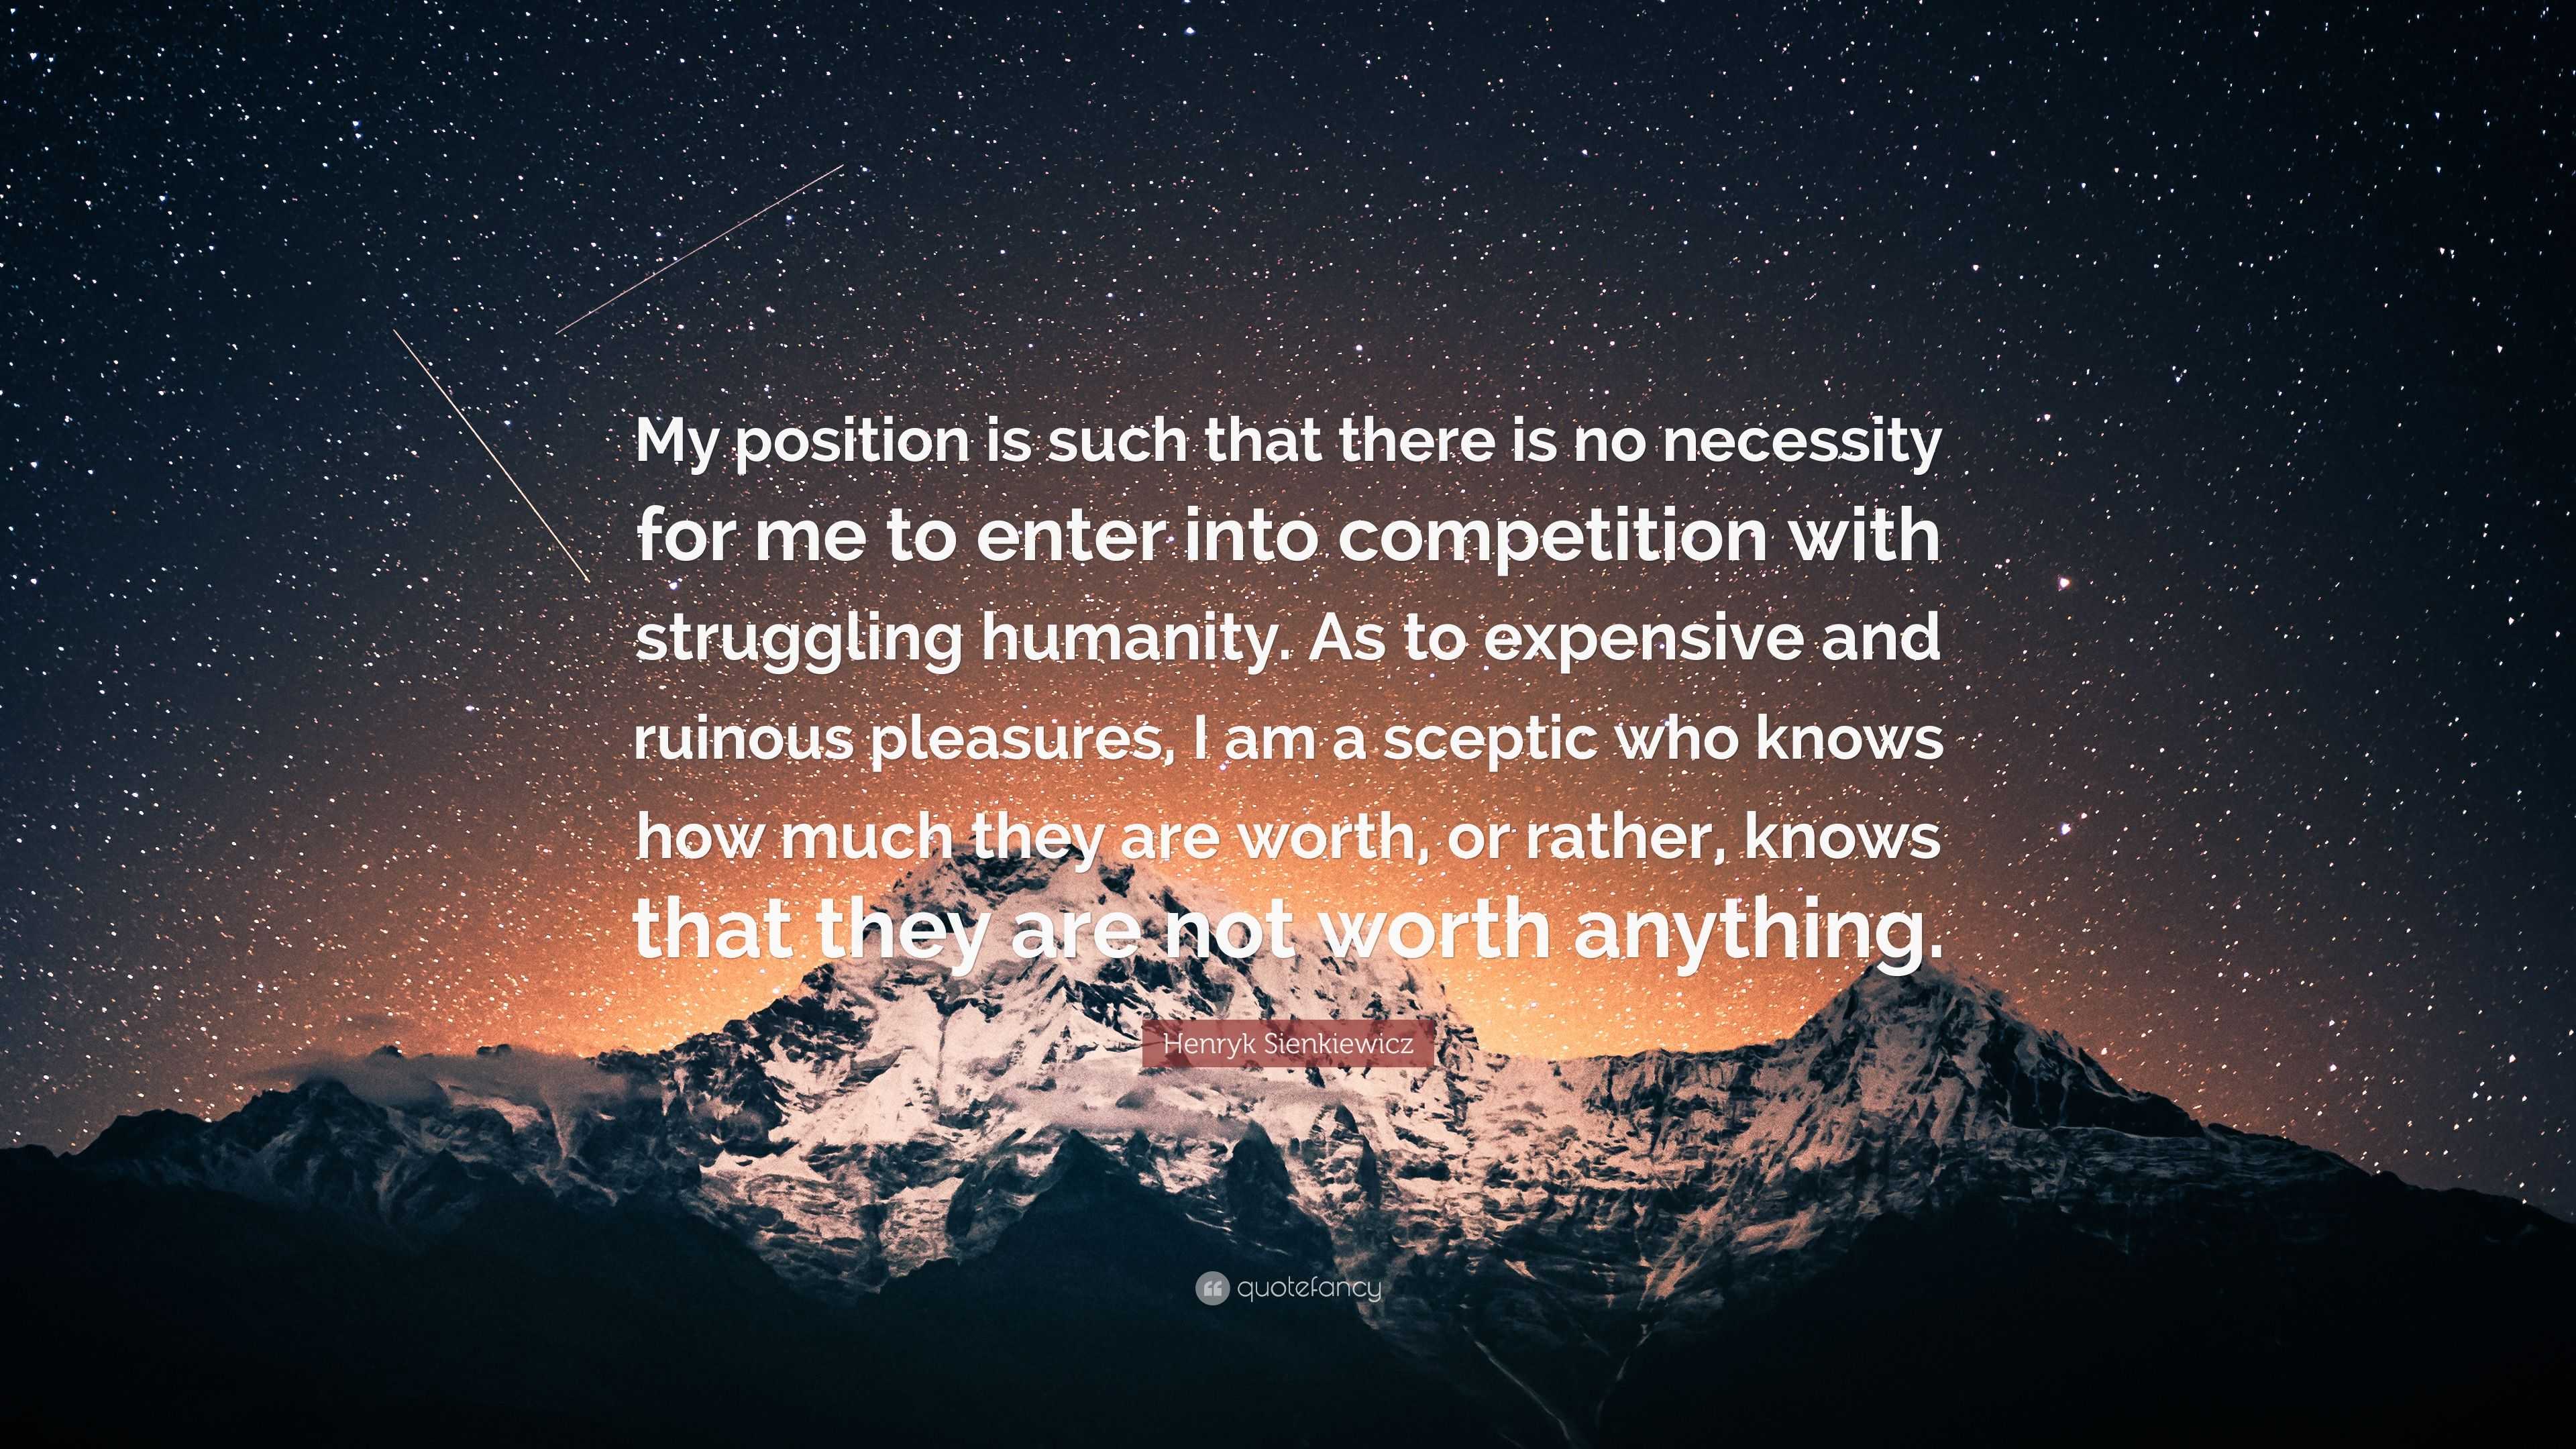 Henryk Sienkiewicz Quote: “My position is such that there is no necessity  for me to enter into competition with struggling humanity. As to  expensiv”